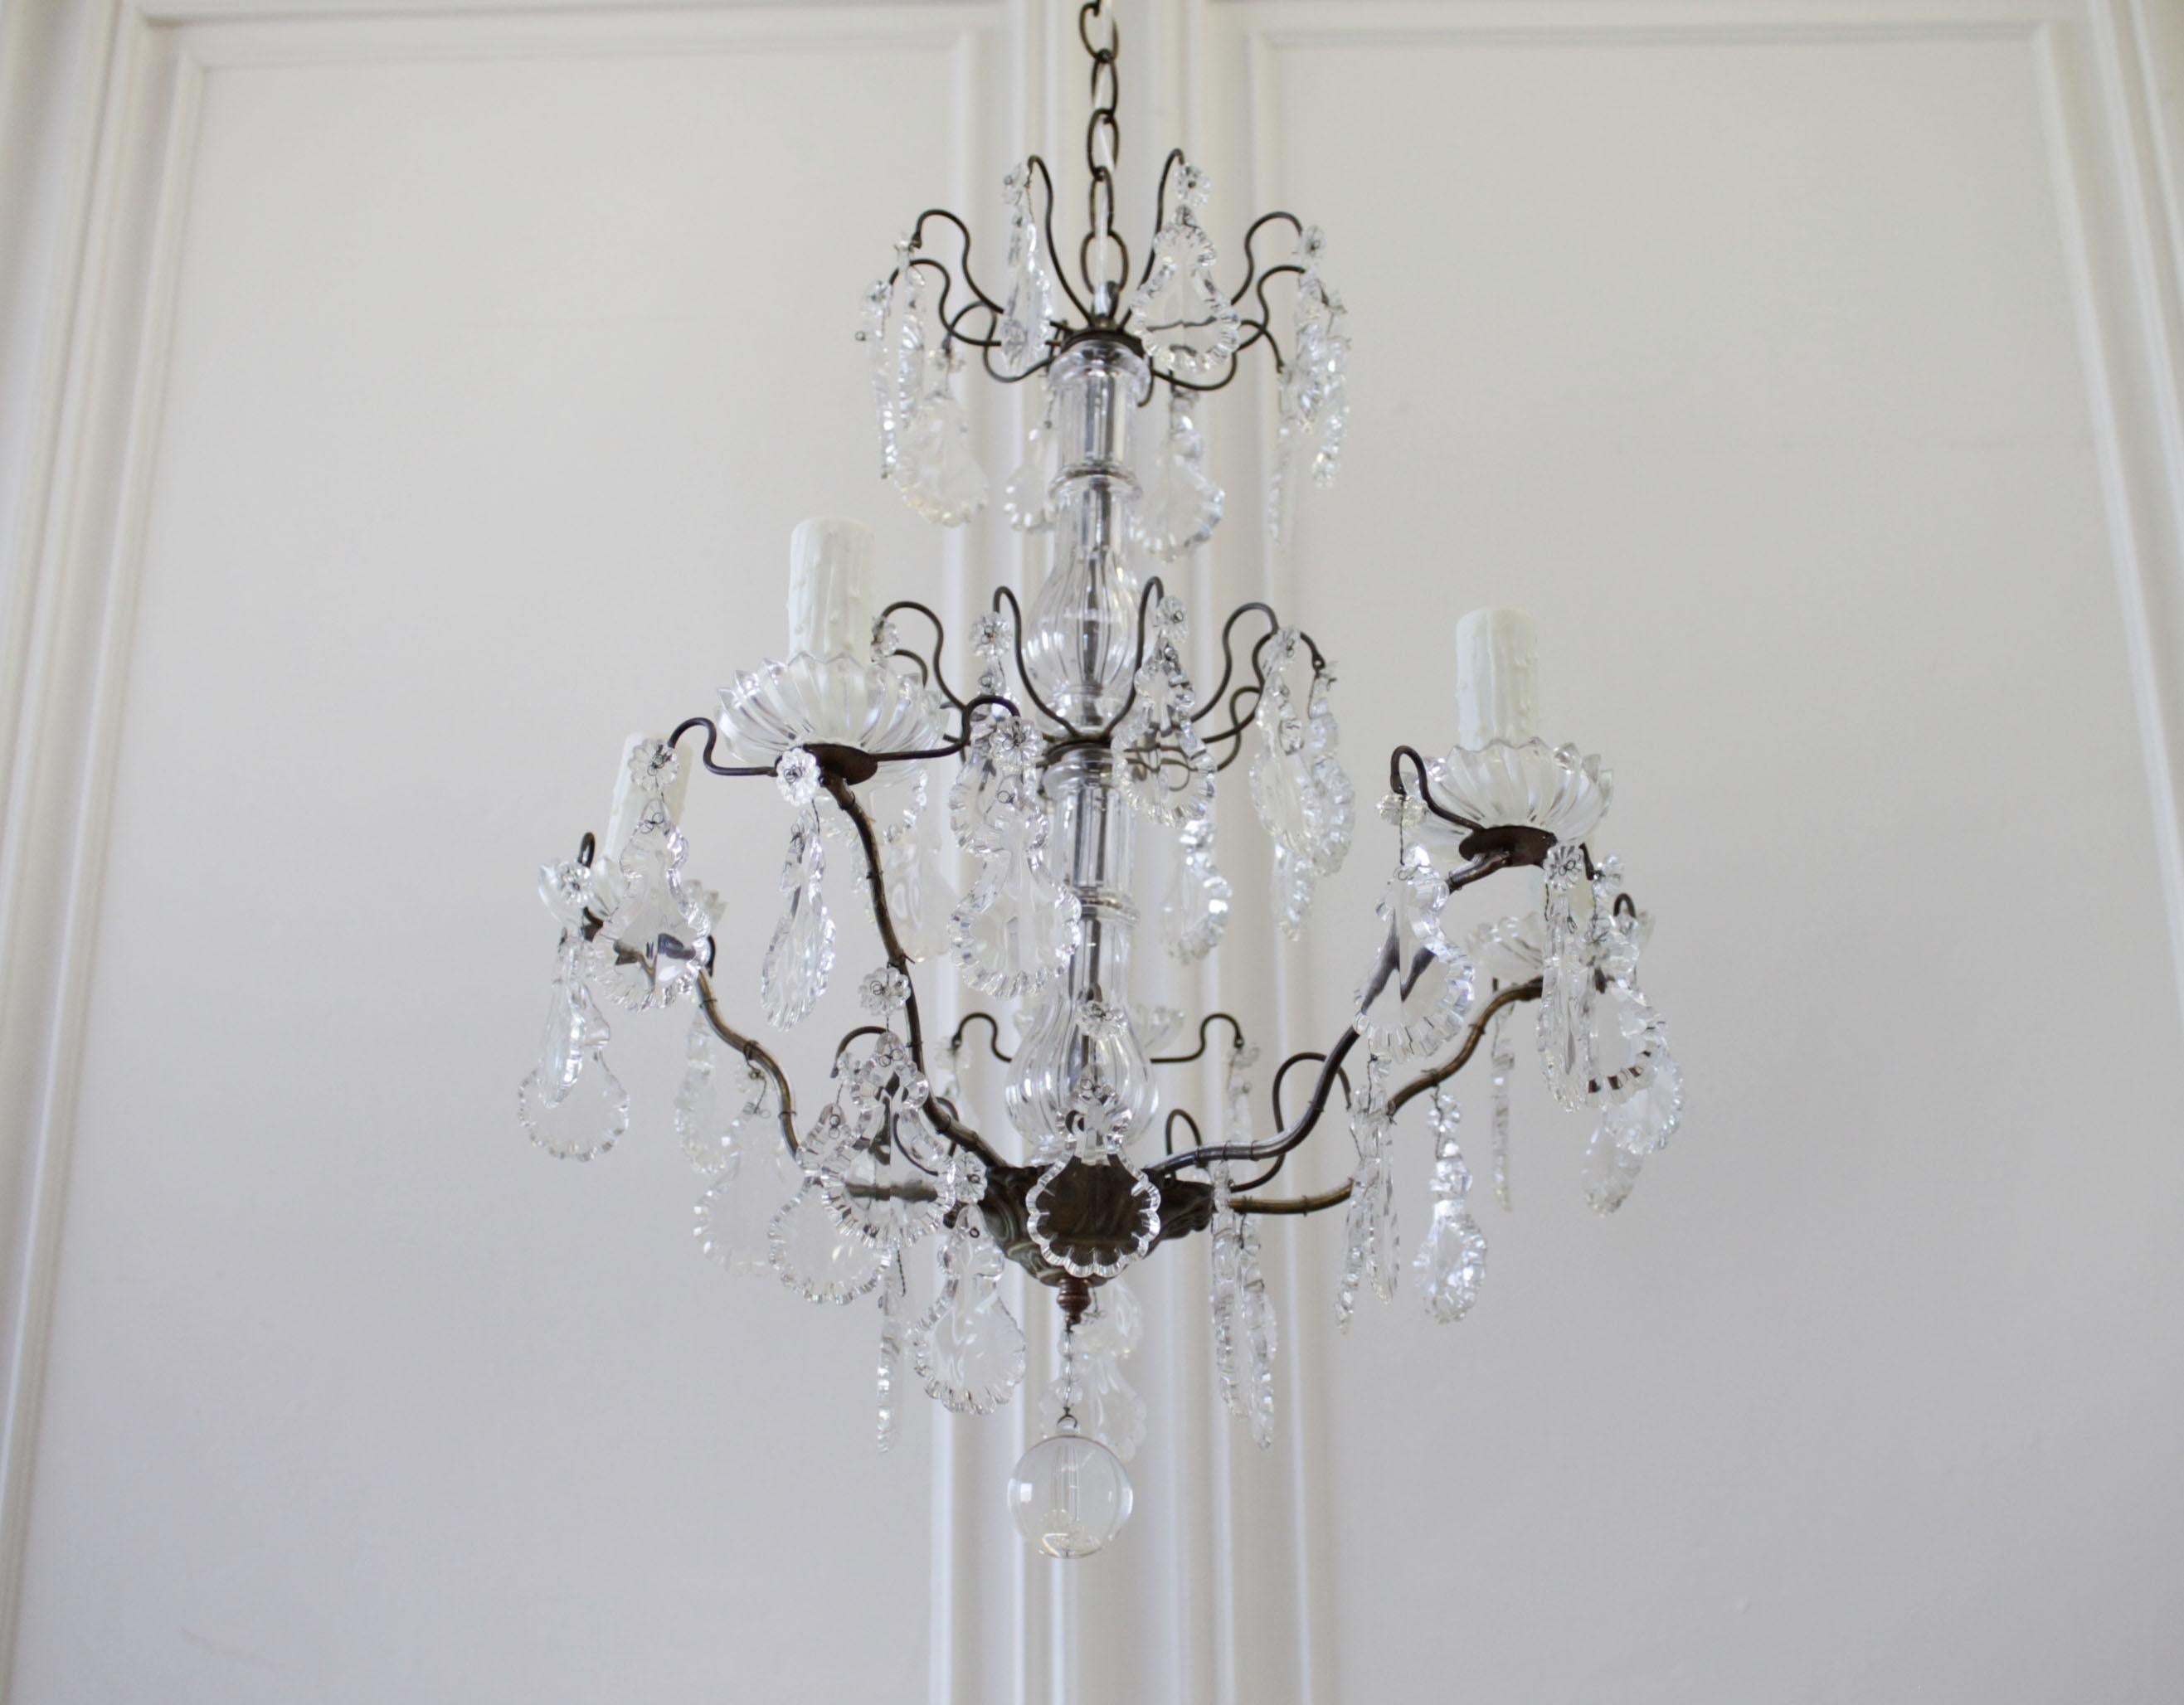 Small French bronze style chandelier with crystals
New wiring. Measures: 20